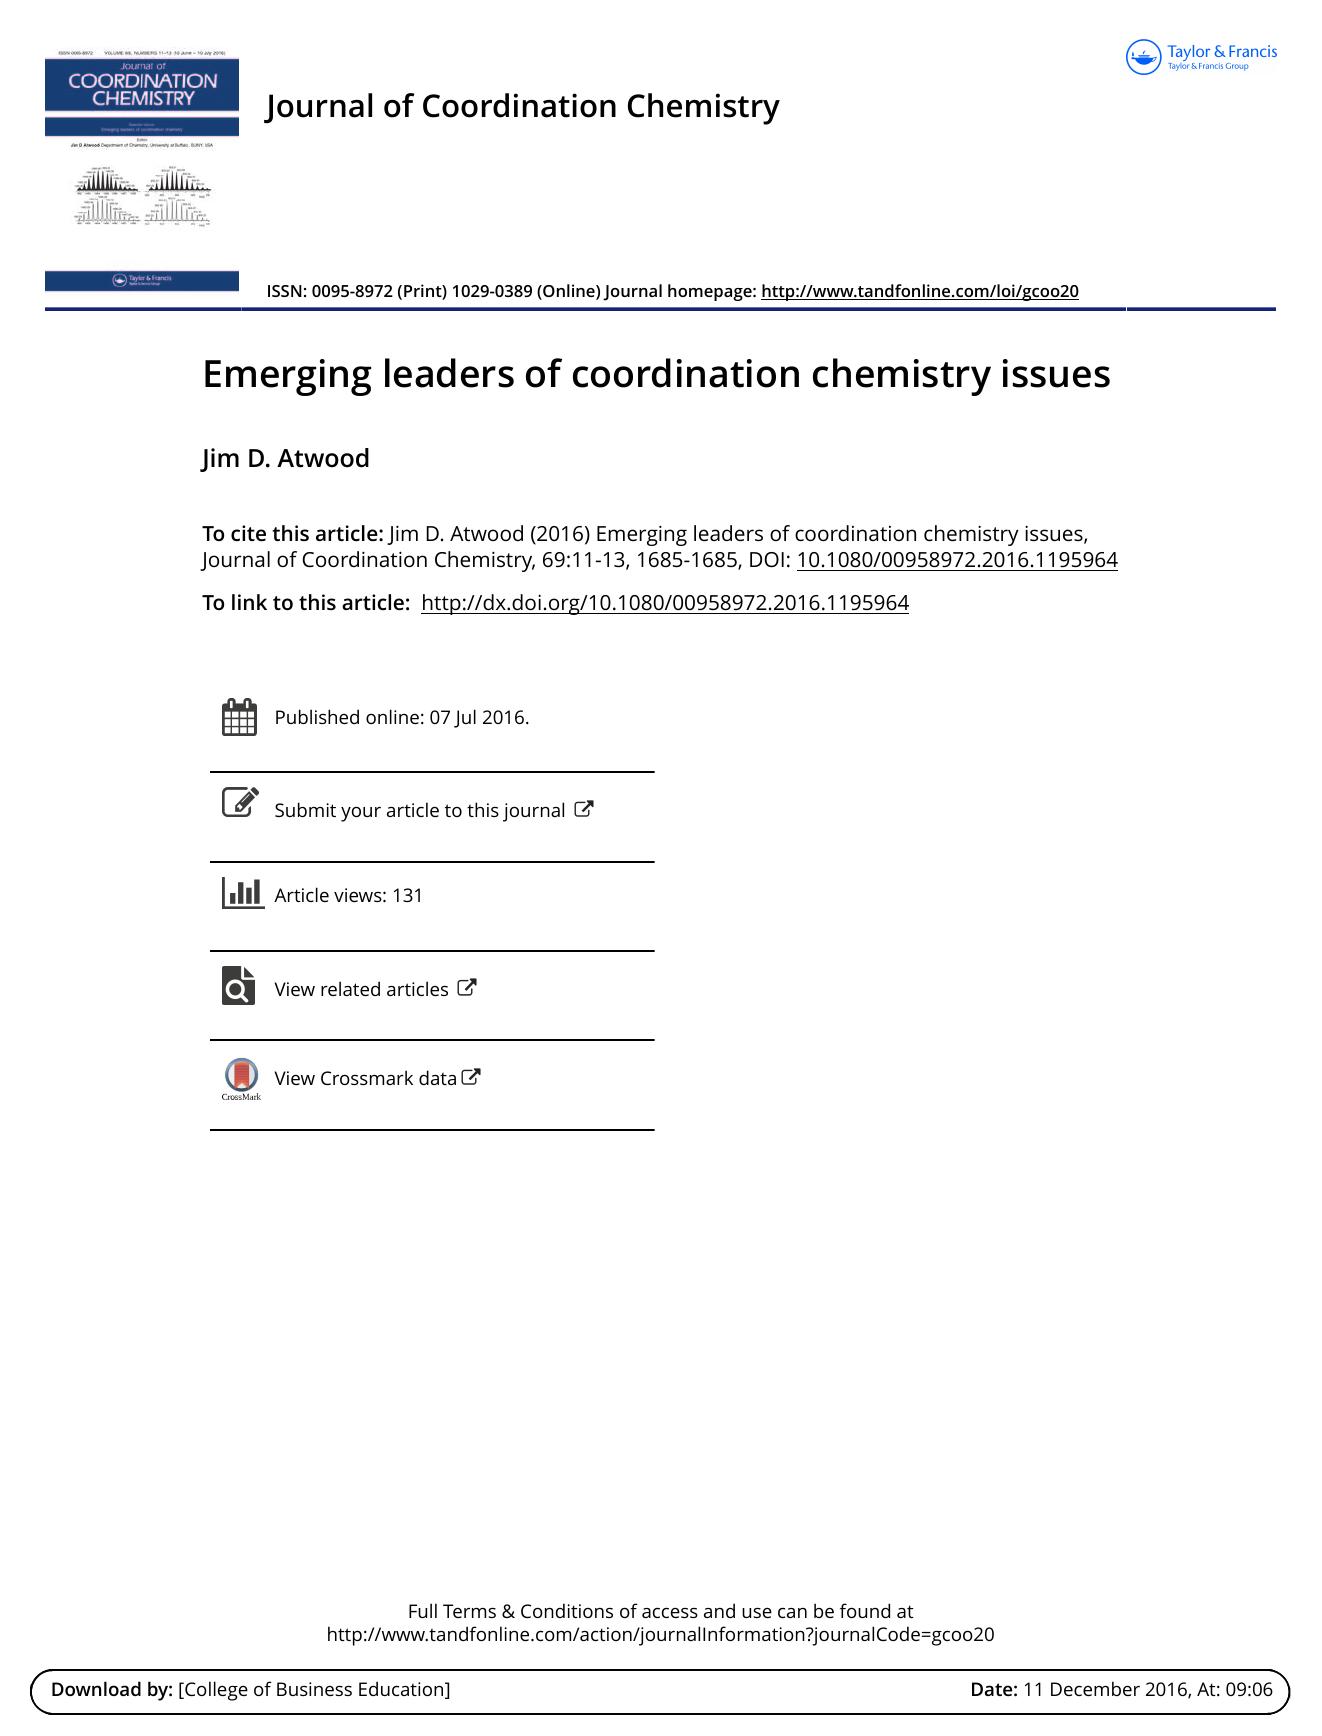 Emerging leaders of coordination chemistry issues by Jim D. Atwood